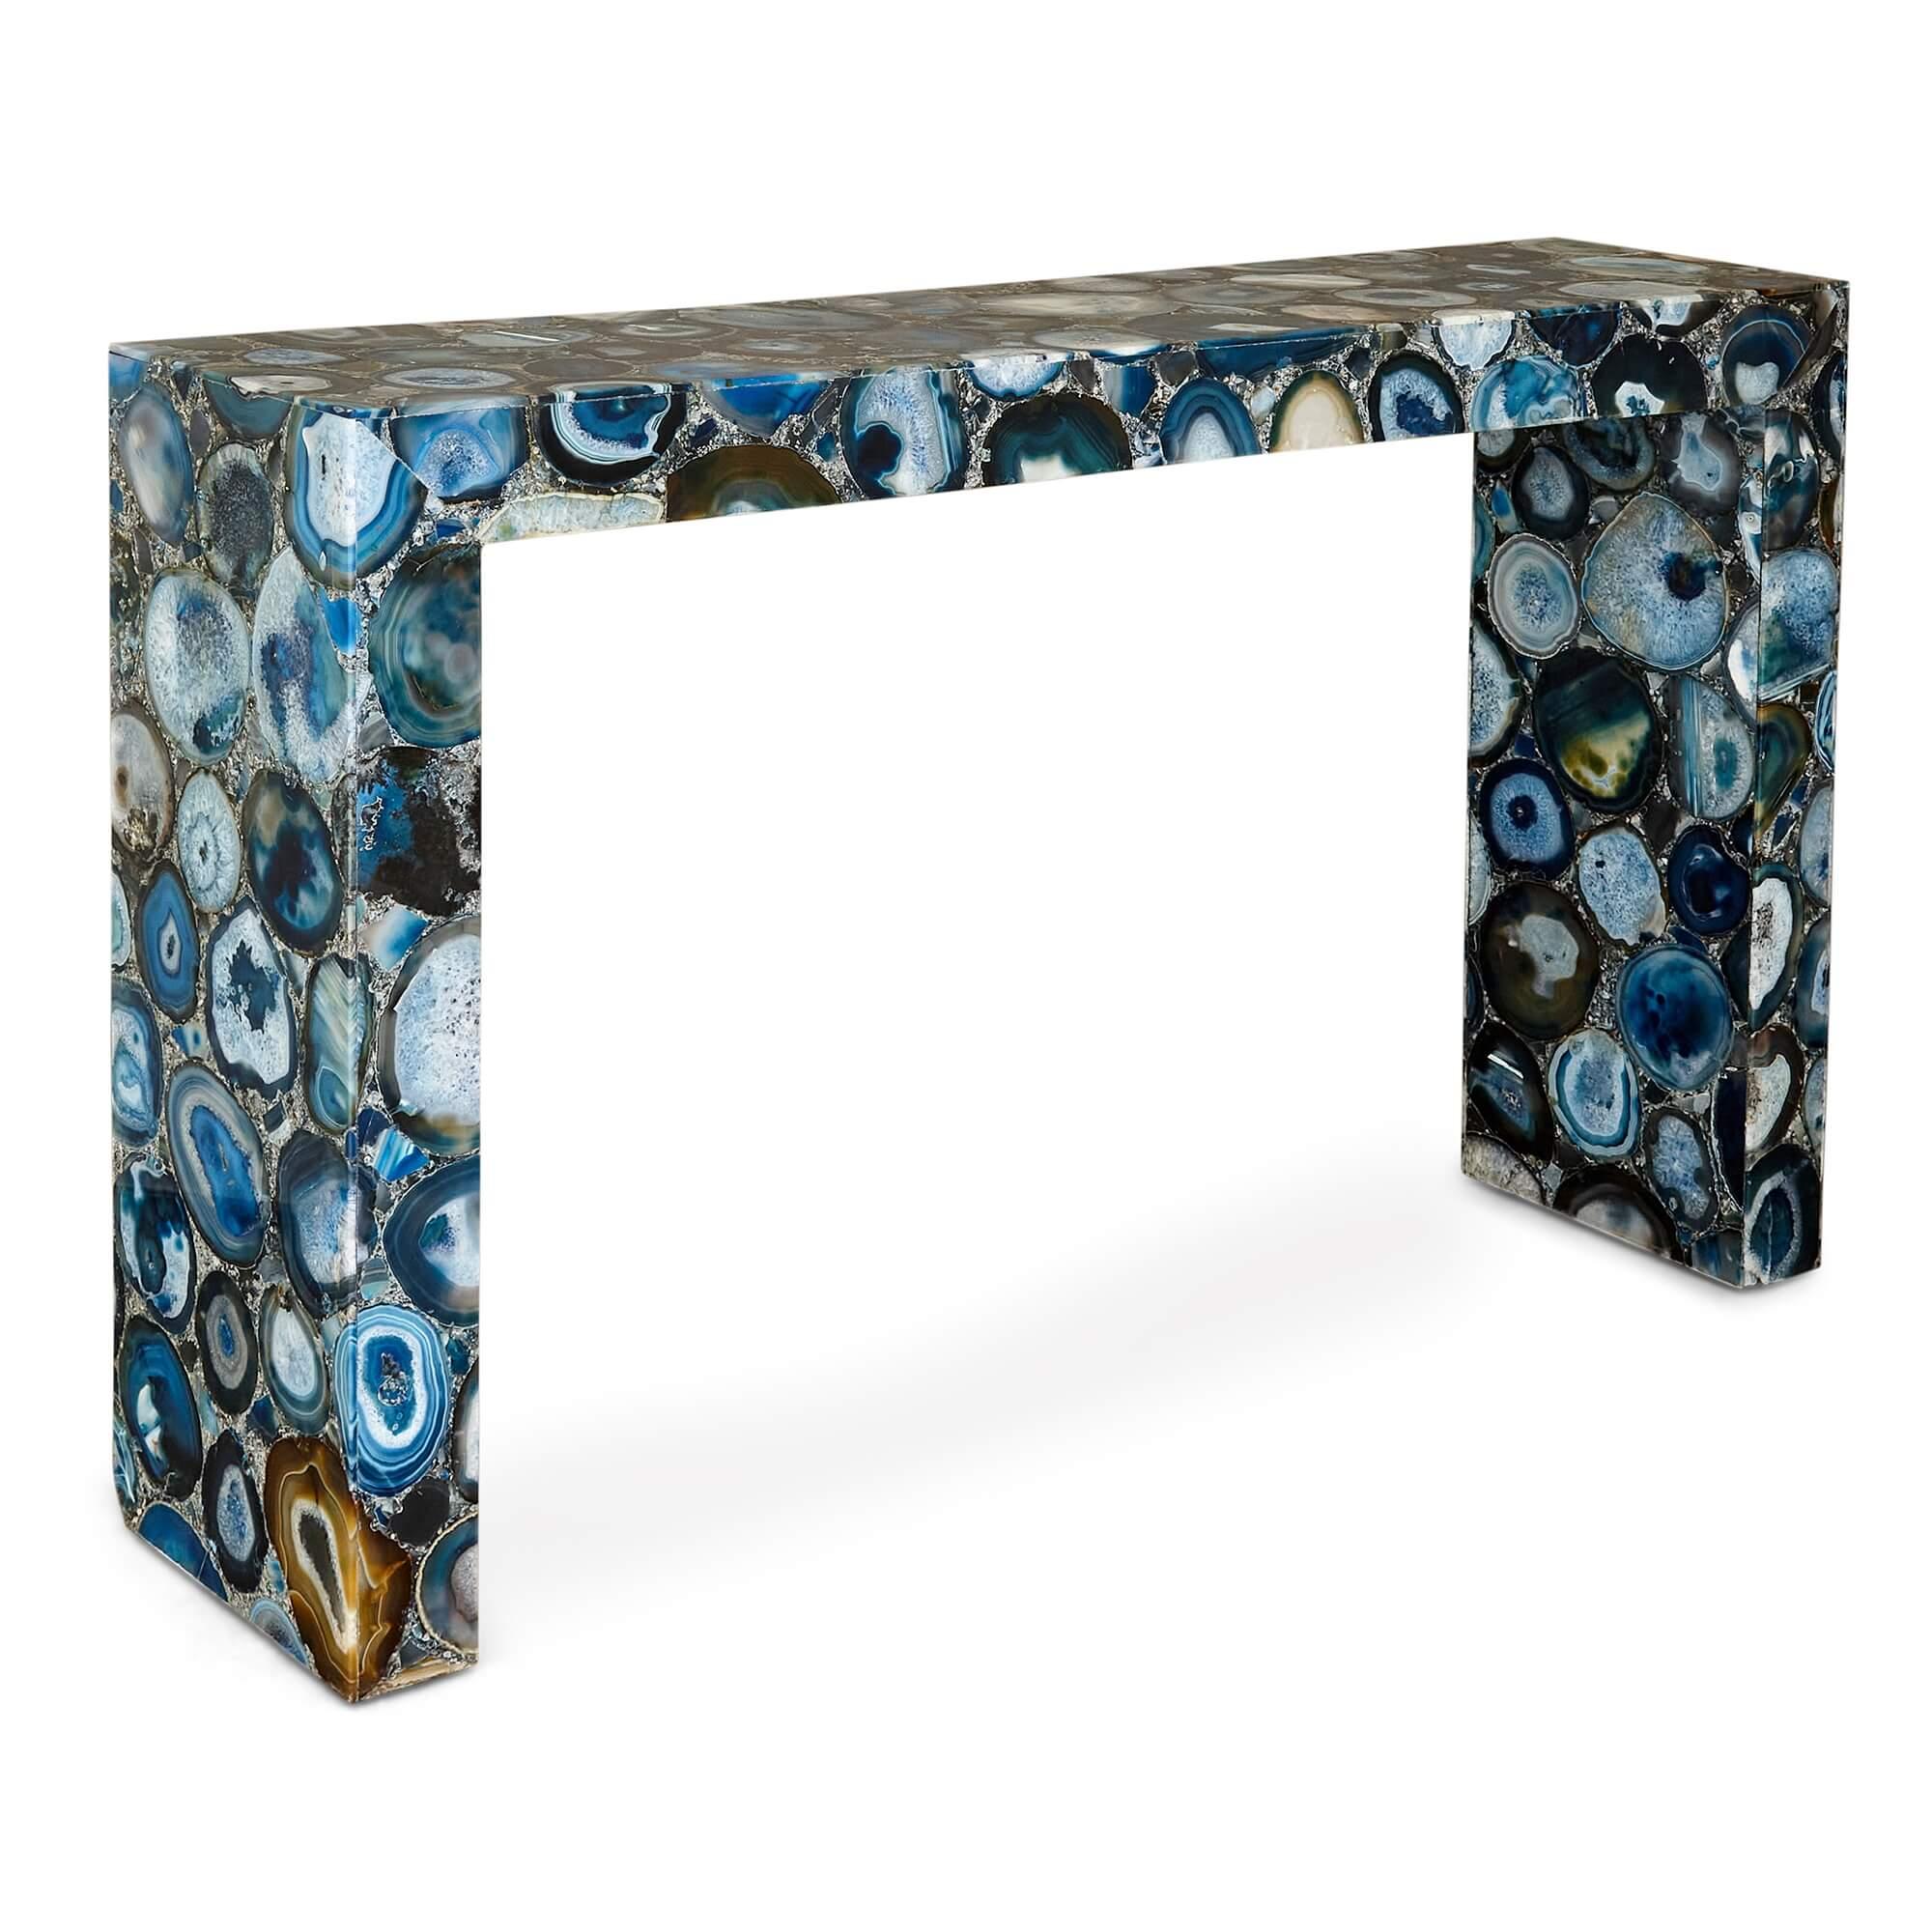 Pair of blue agate console tables 
Continental, 20th Century 
Height 92cm, width 152.5cm, depth 36cm

A blue agate veneer covers the surface of both console tables crafted in the 20th century. The sea of blue circular shapes creates an intriguing